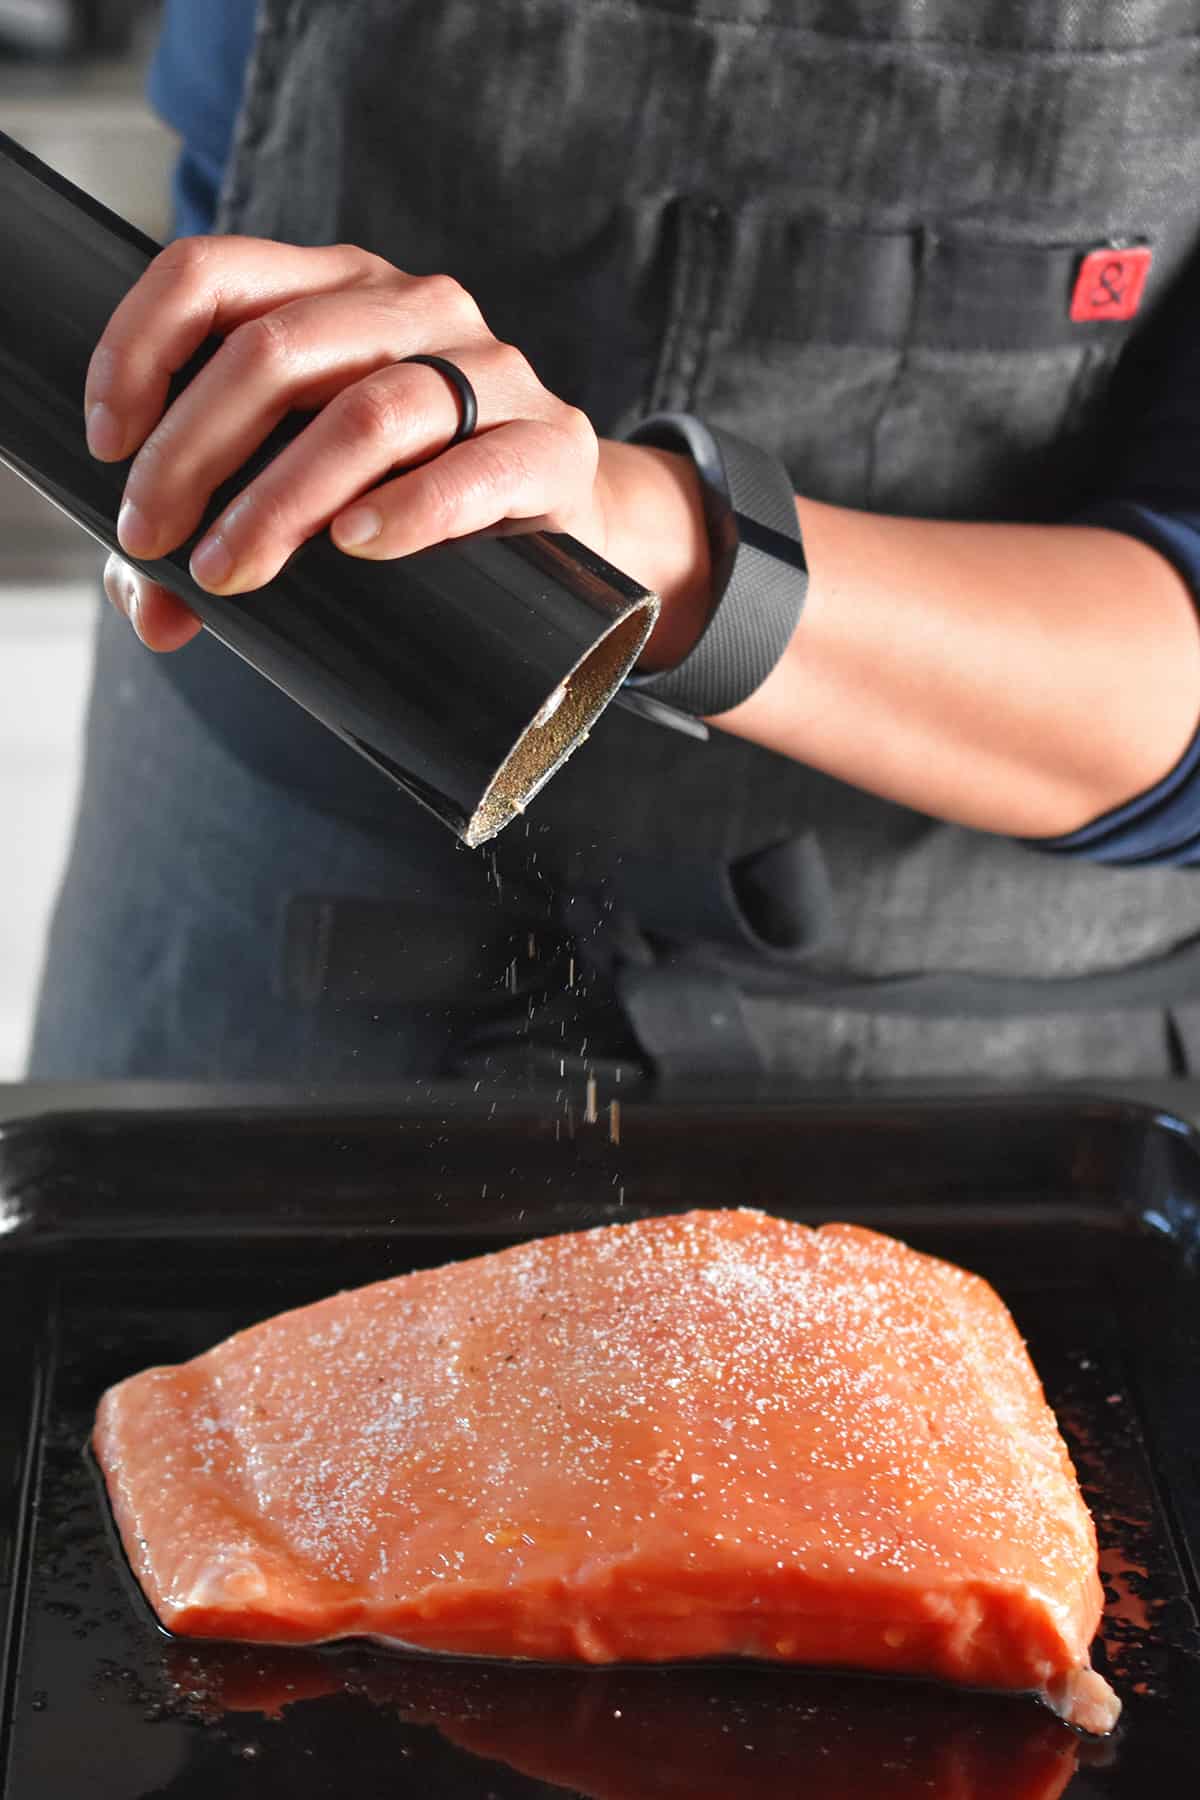 Adding black pepper from a pepper mill to a raw piece of salmon on a black rimmed baking sheet.